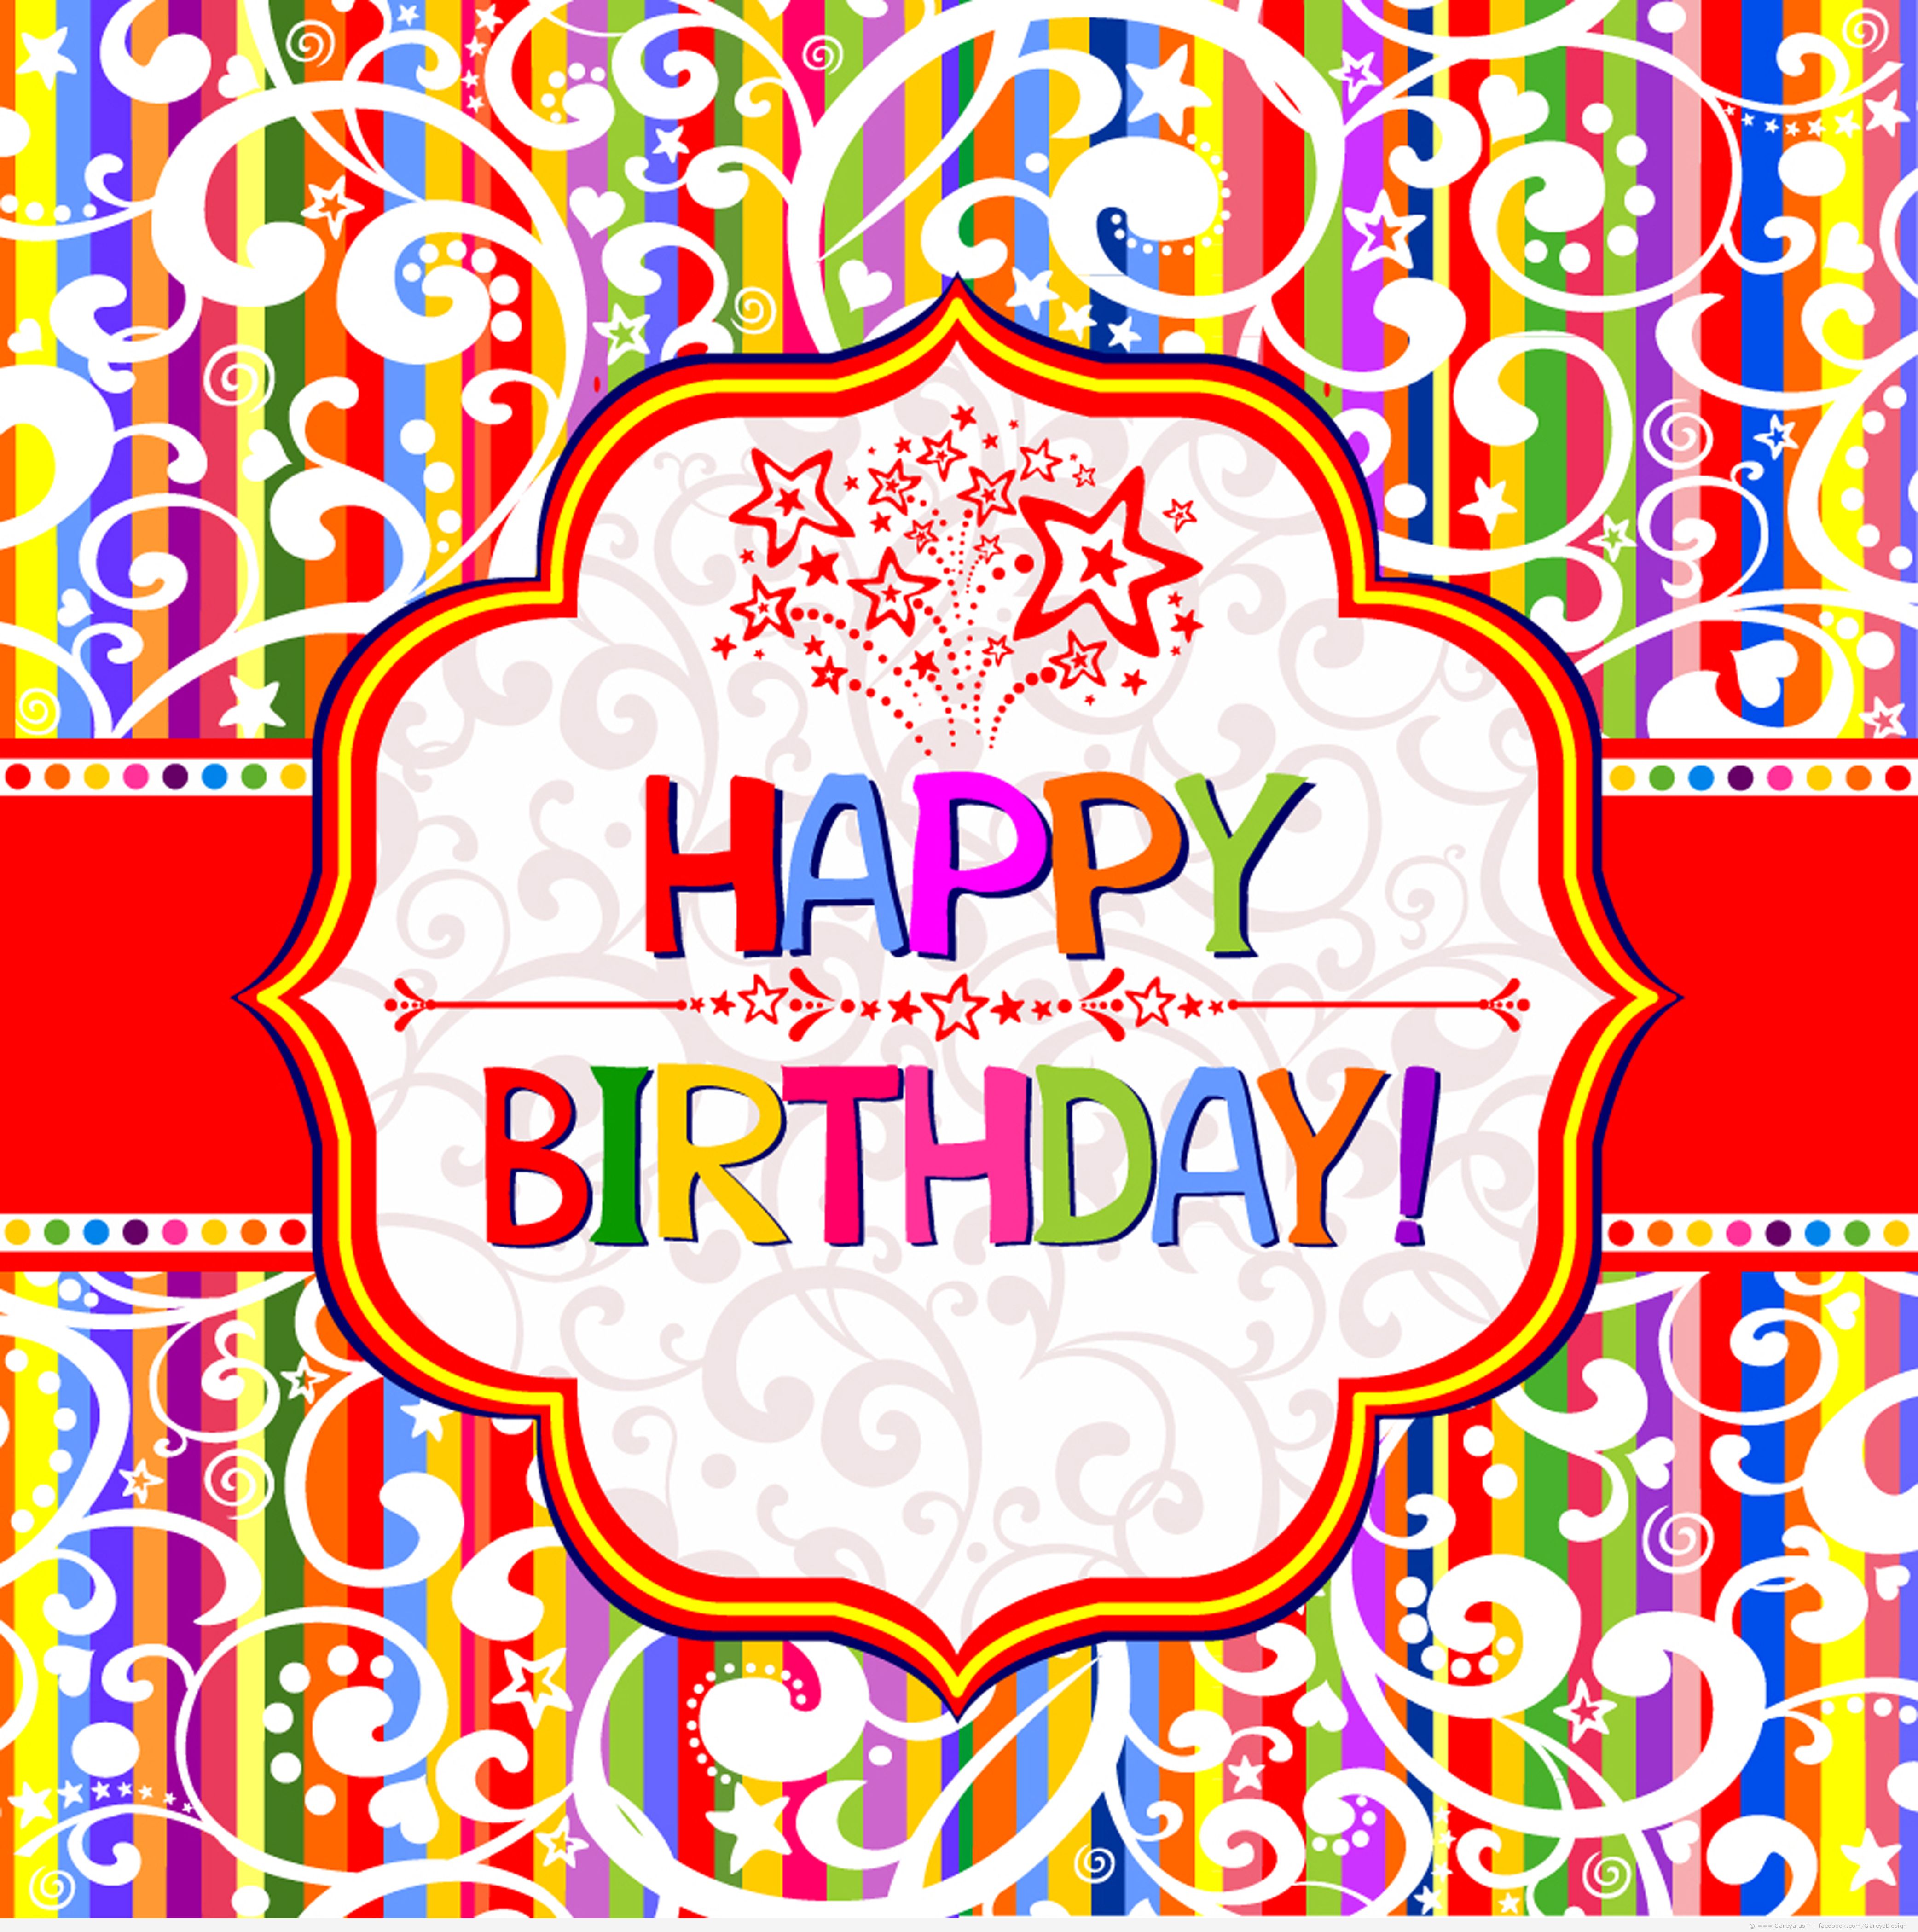 18 Free Vector Birthday Card Images